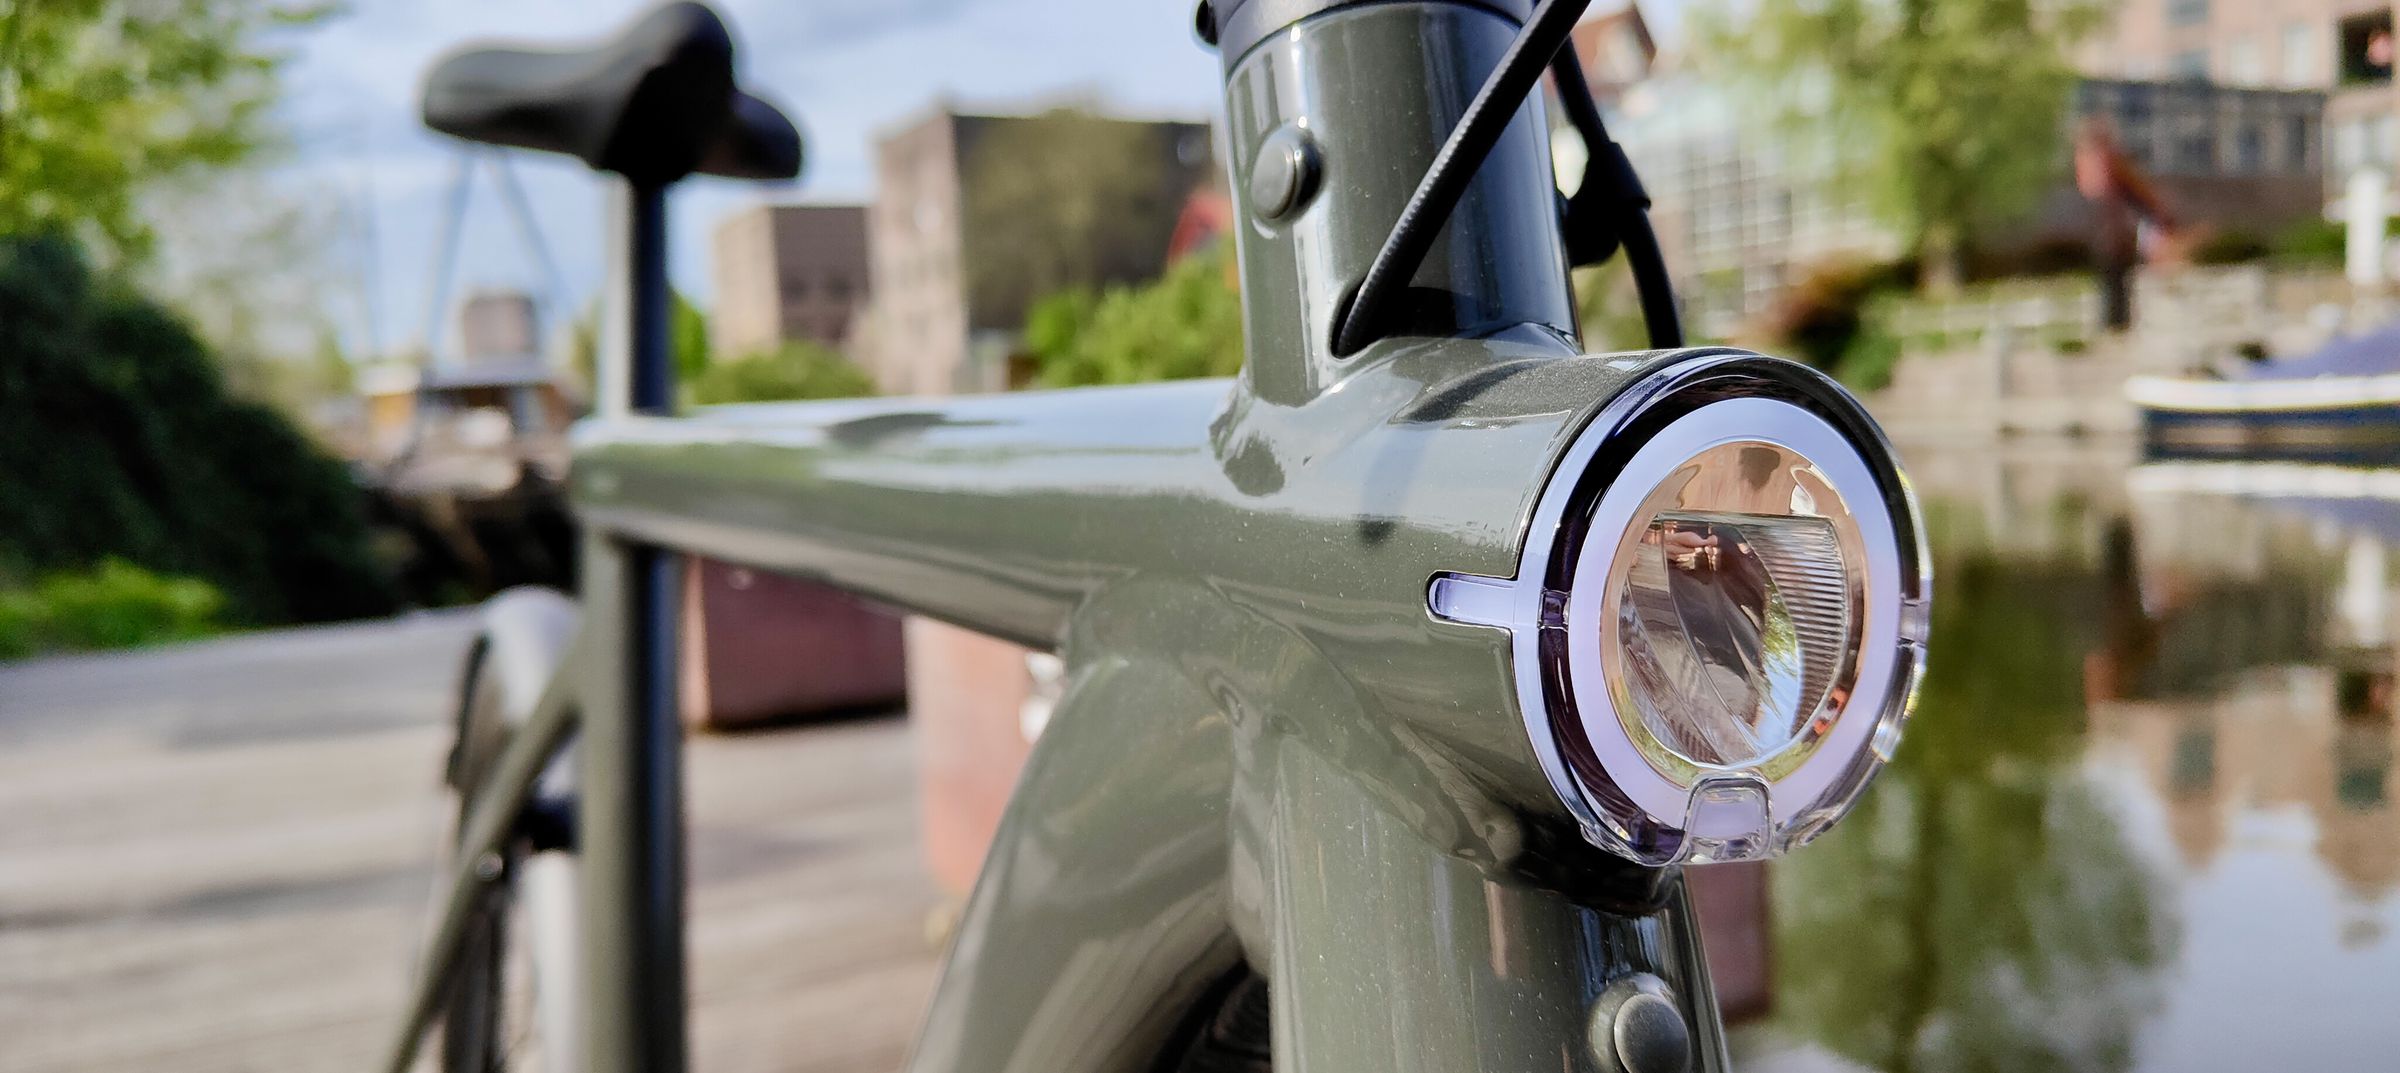 Integrated front lights and cables routed through frame.